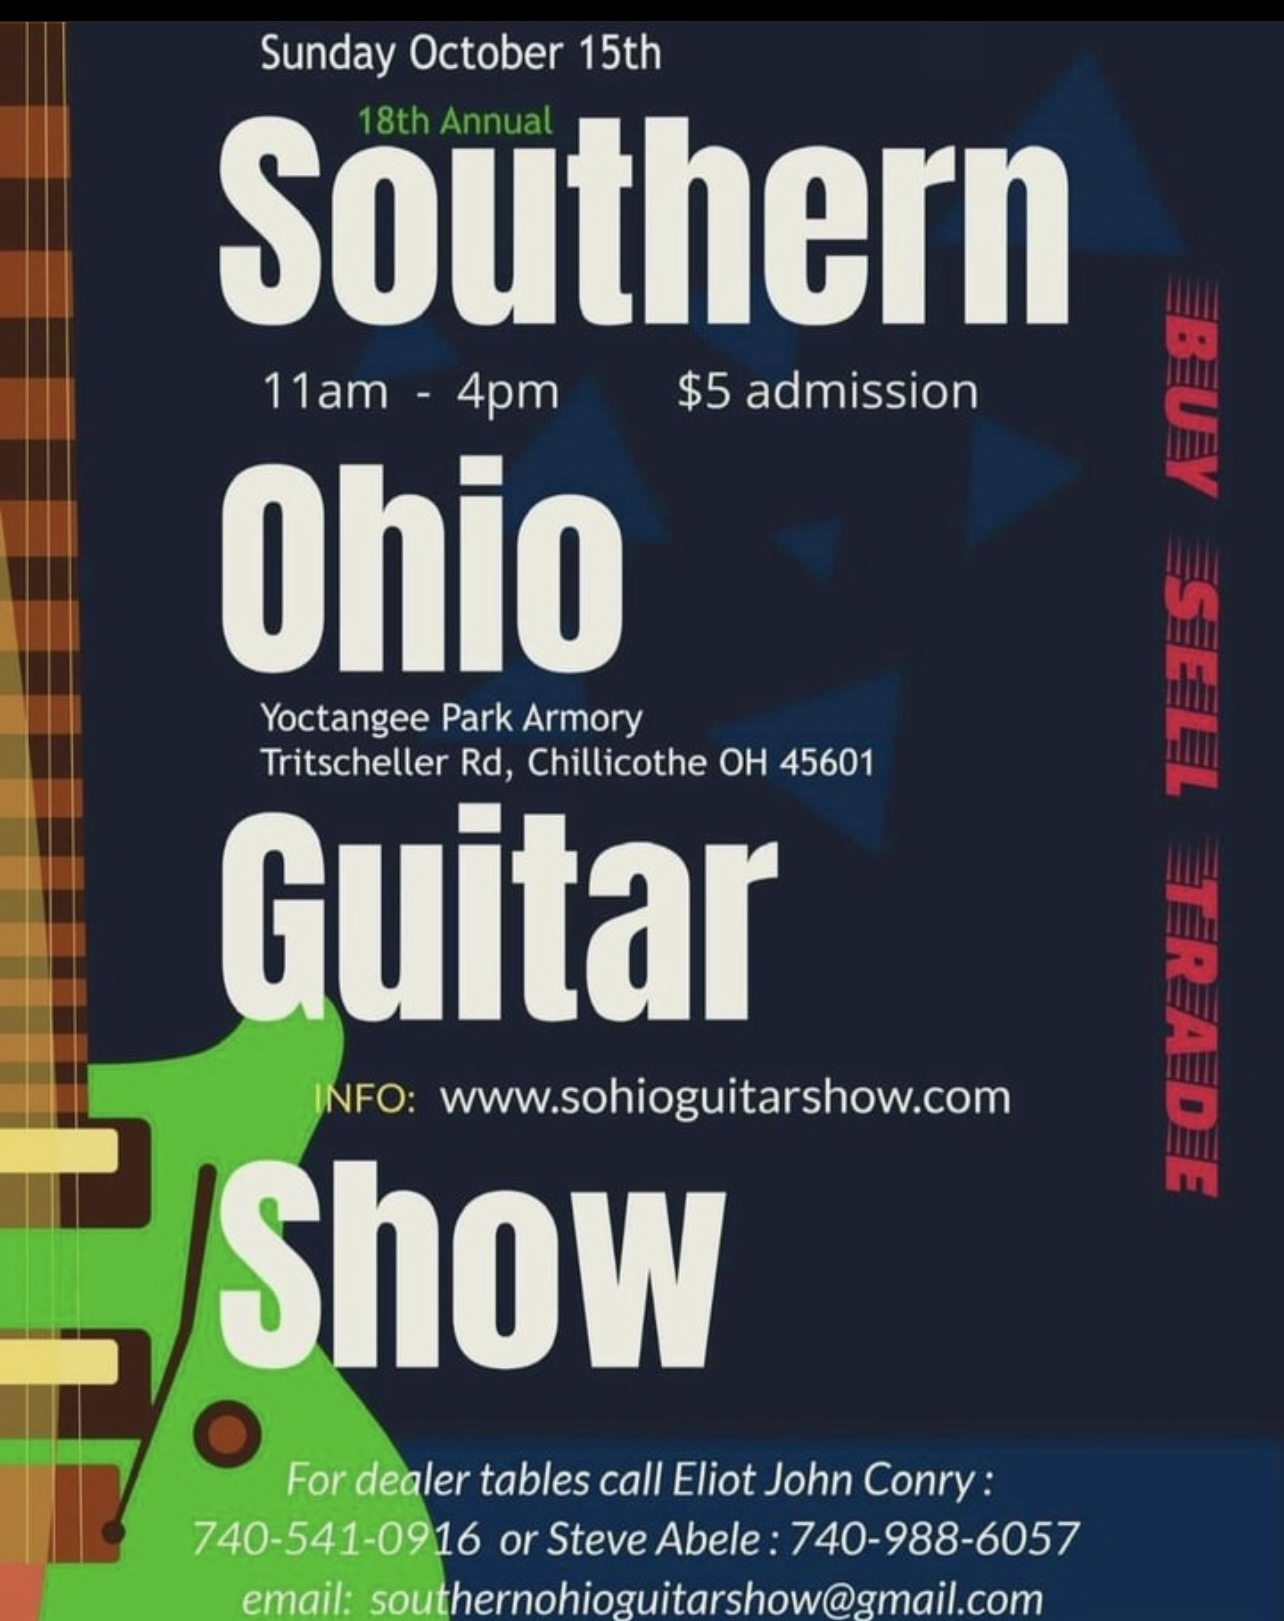 A flyer for the Southern Ohio Guitar Show